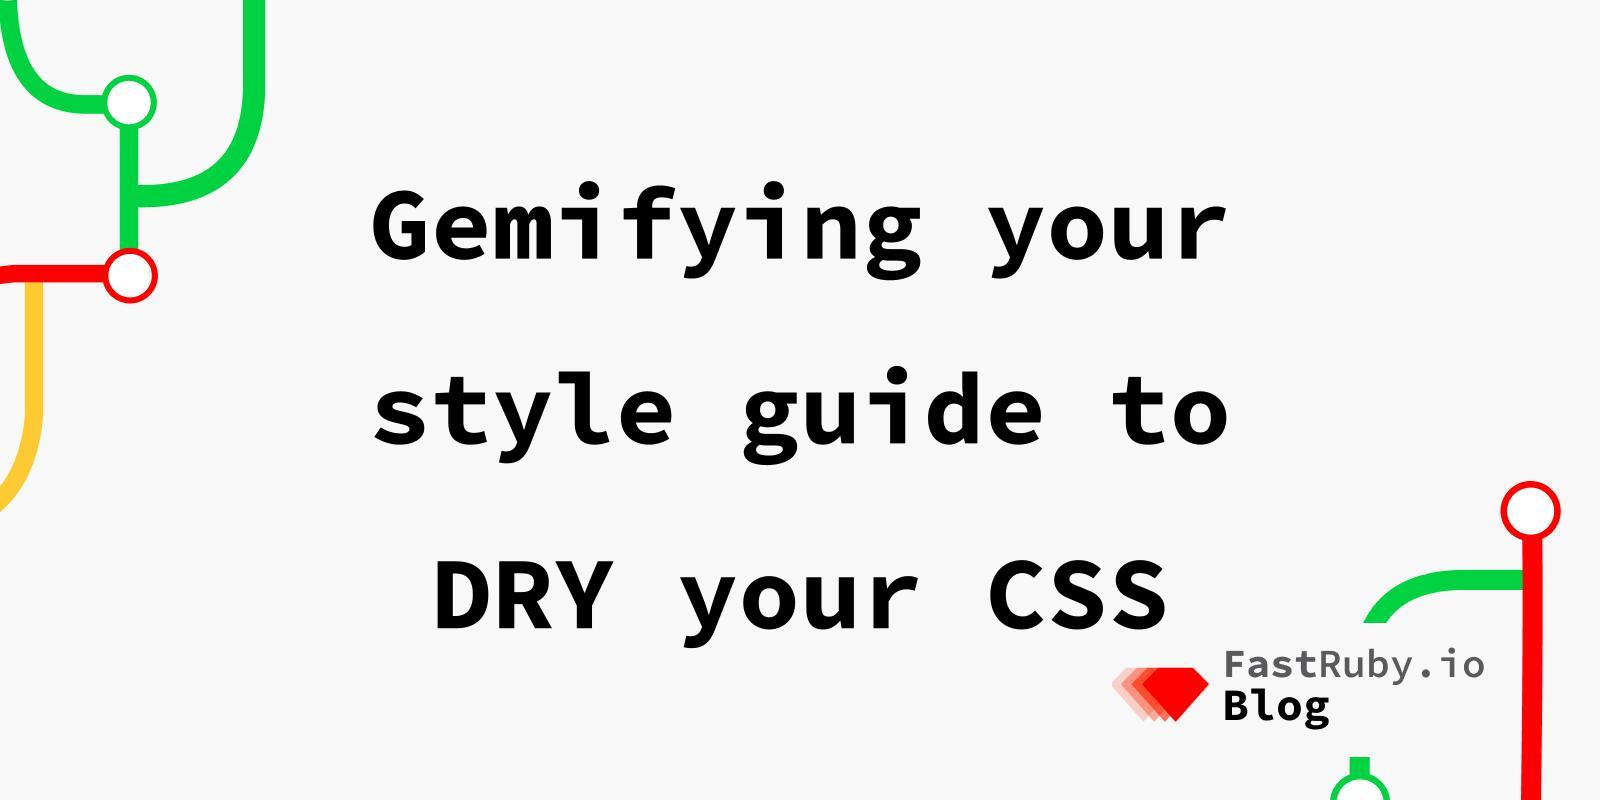 Gemifying your style guide to DRY your CSS